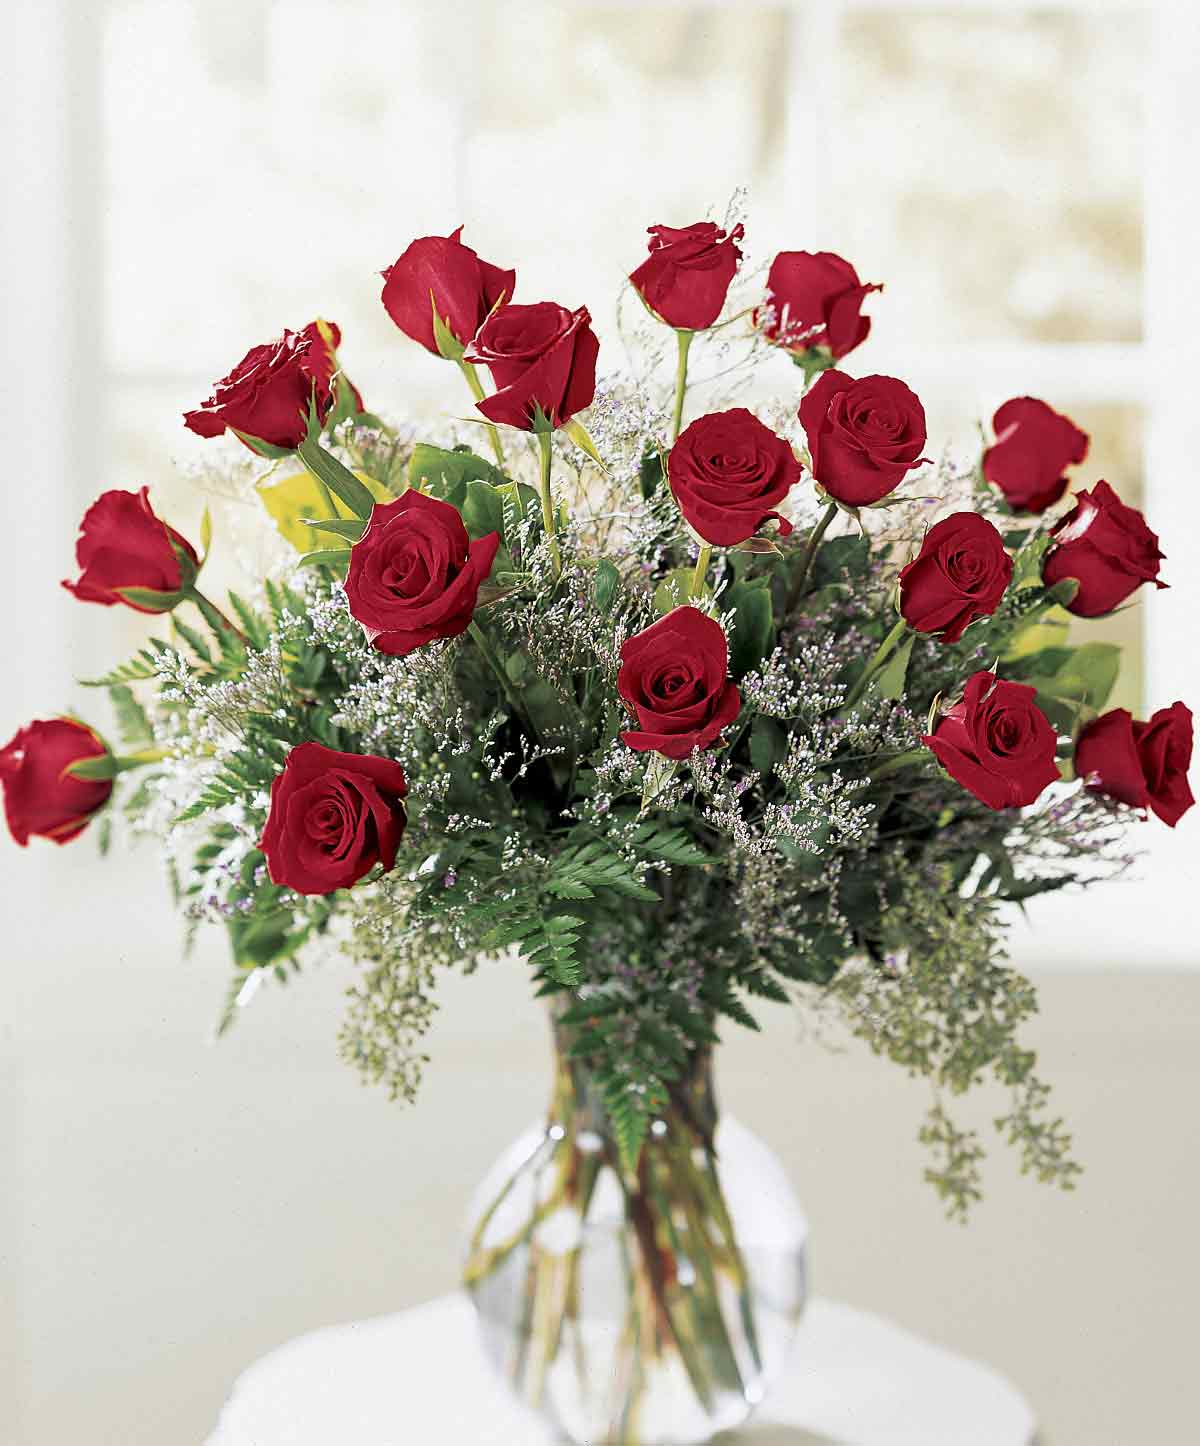 Valentine Day Flowers - Roses